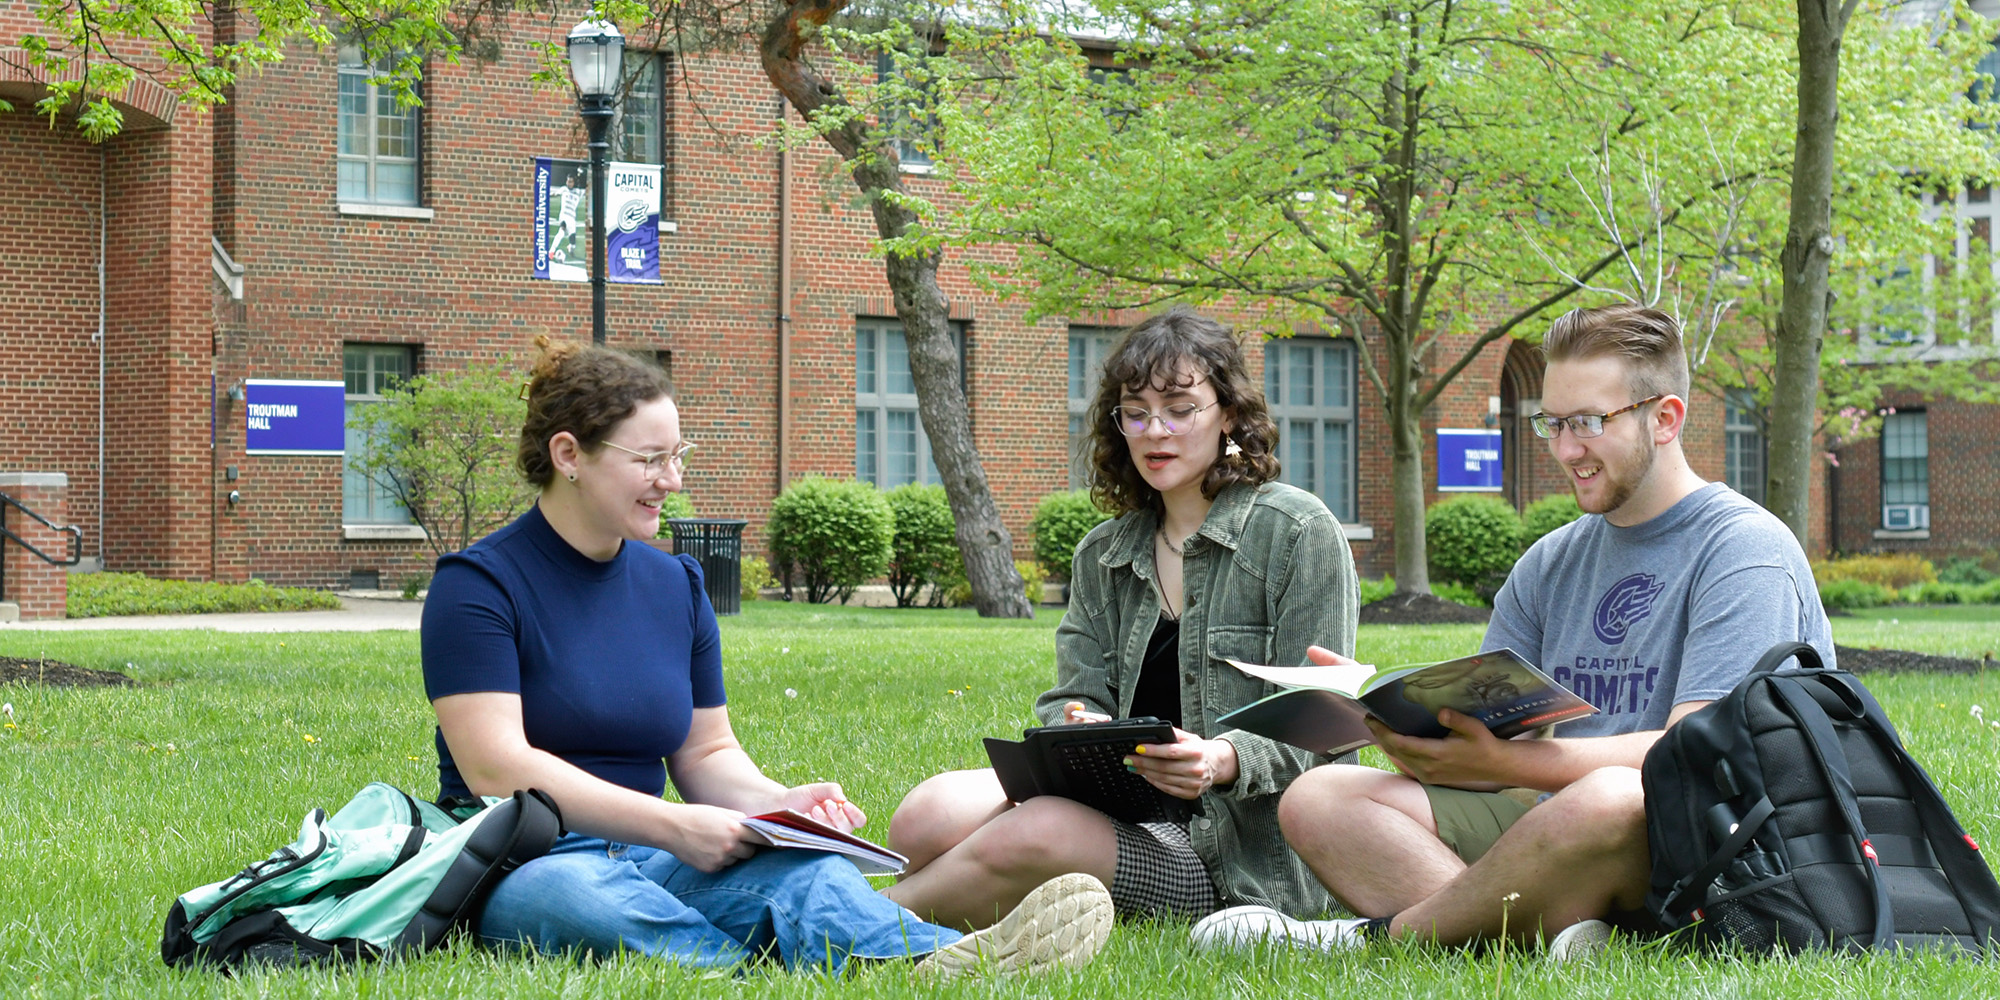 Students Sitting On Lawn In Quad